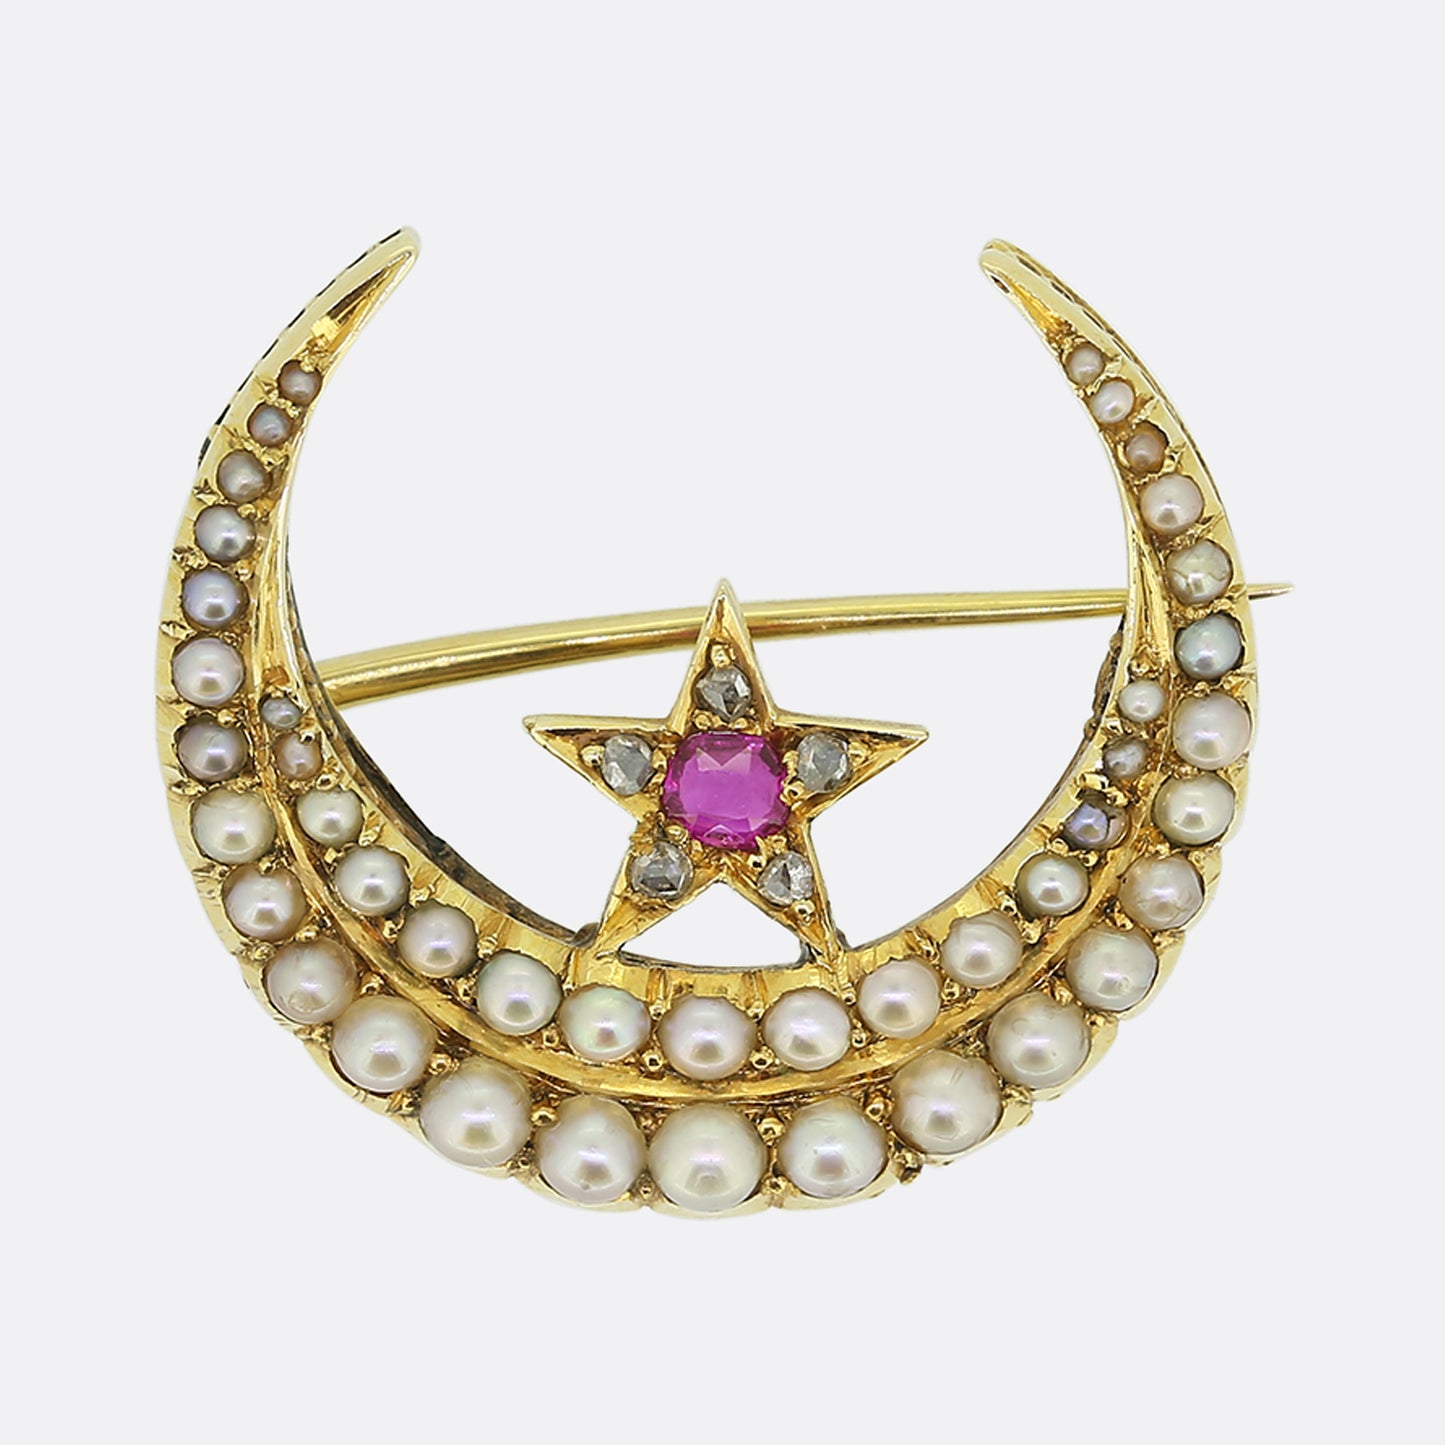 Victorian Ruby Diamond and Pearl Crescent Brooch